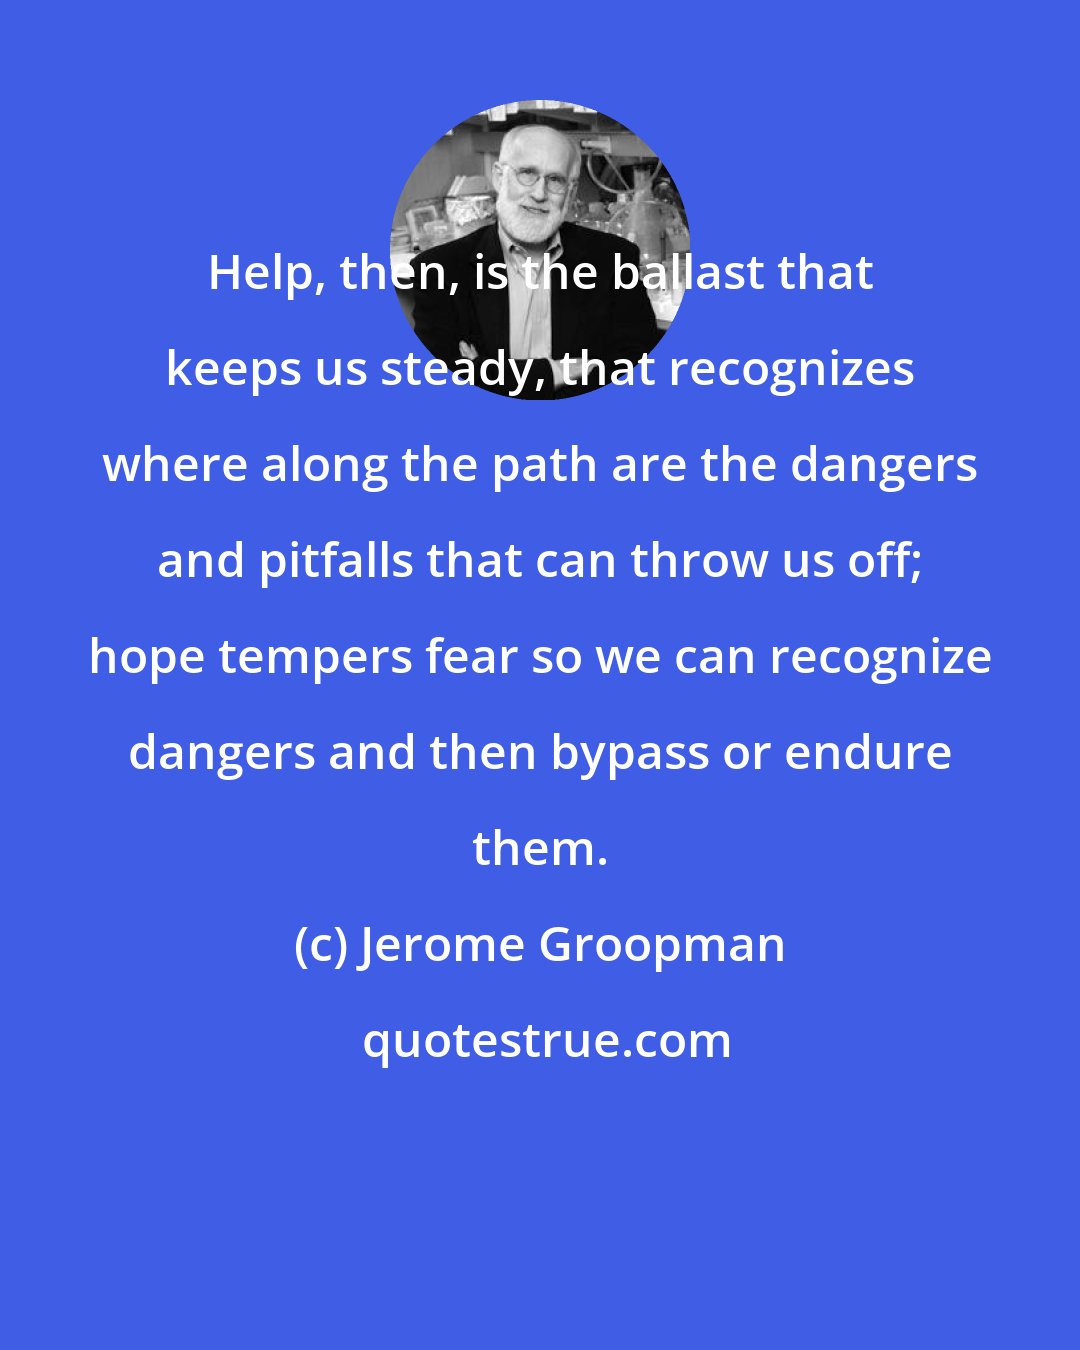 Jerome Groopman: Help, then, is the ballast that keeps us steady, that recognizes where along the path are the dangers and pitfalls that can throw us off; hope tempers fear so we can recognize dangers and then bypass or endure them.